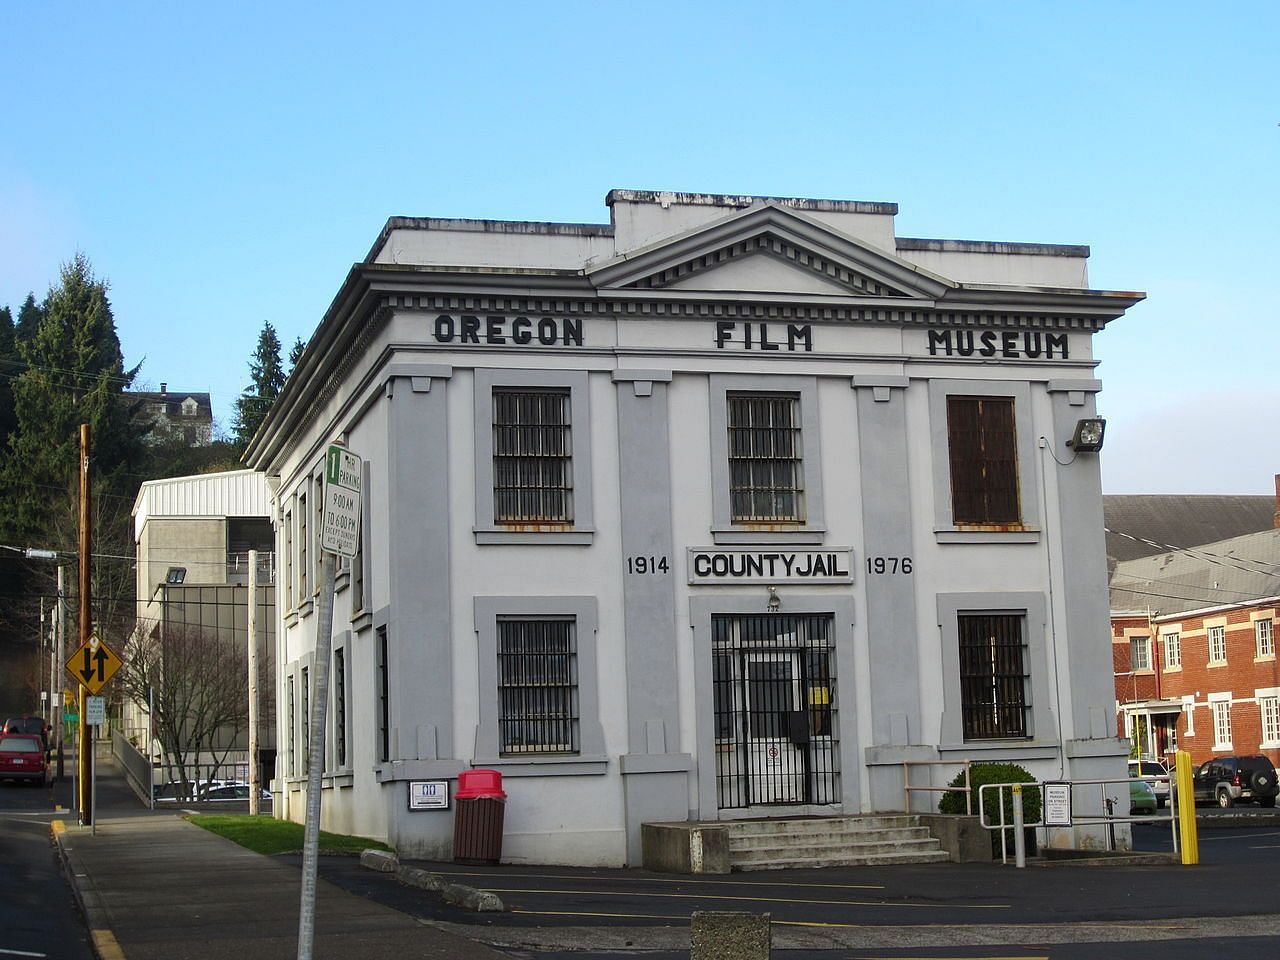 The Oregon Film Museum repurposed from the Clatsop County Jail (Image via Wikimedia Commons)